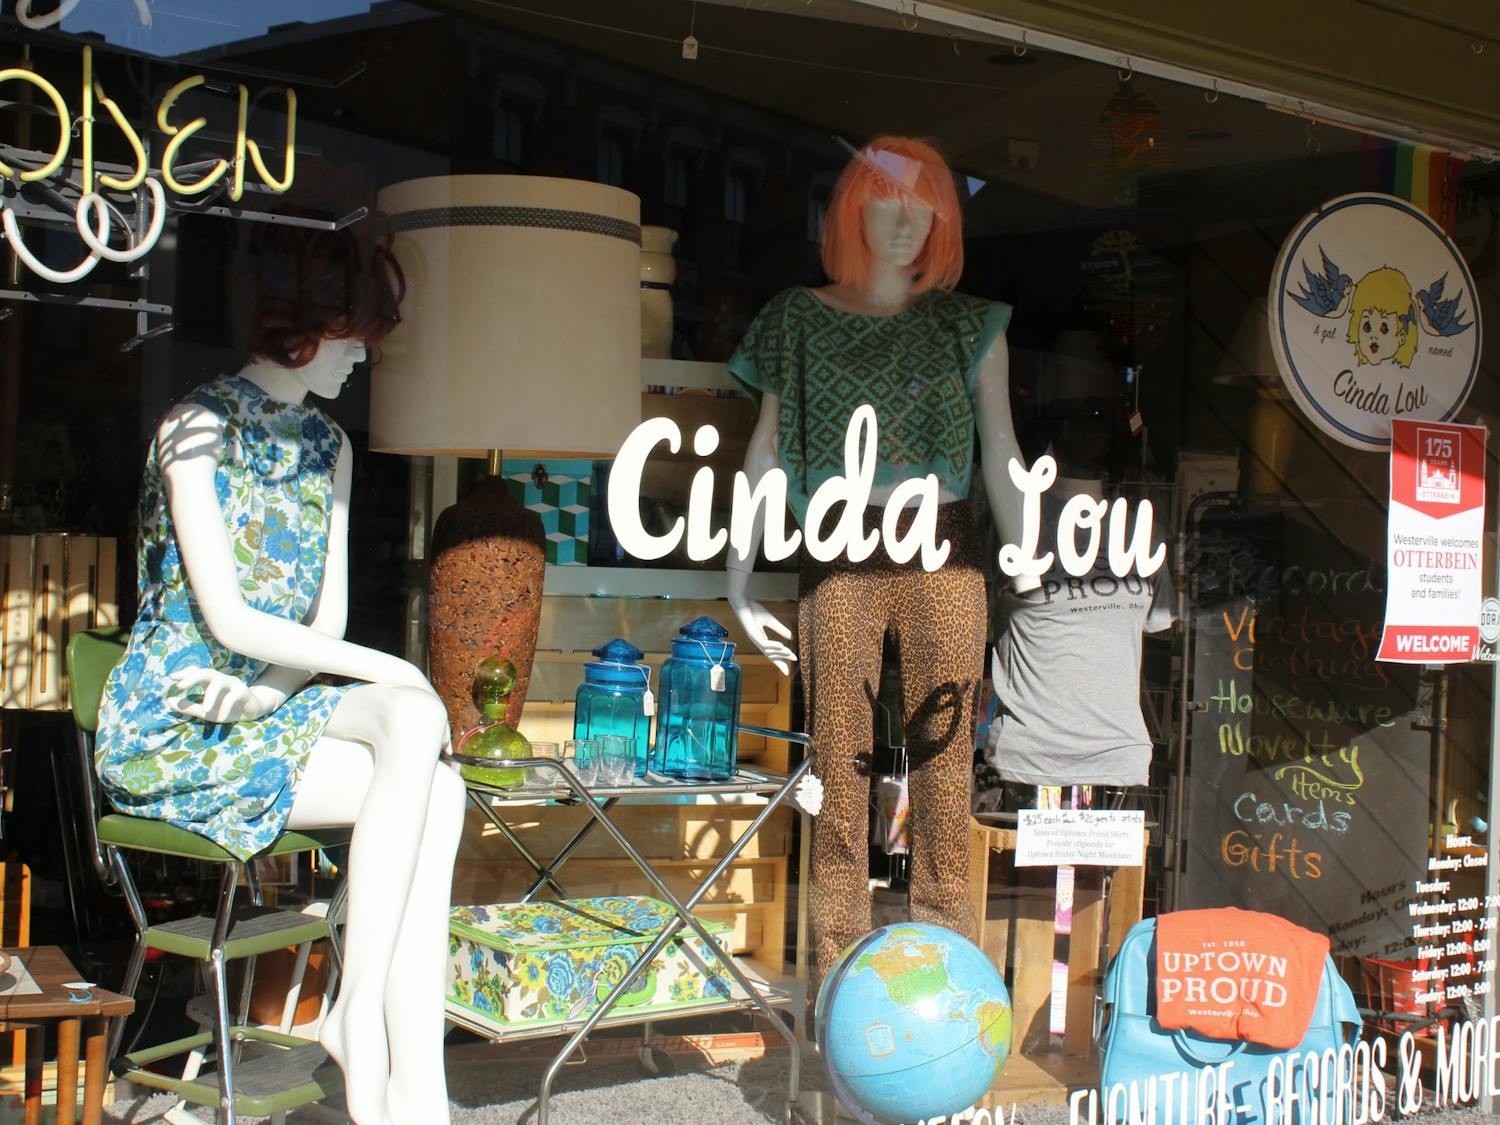 A Gal Named Cinda Lou sells vintage items in Westerville, OH